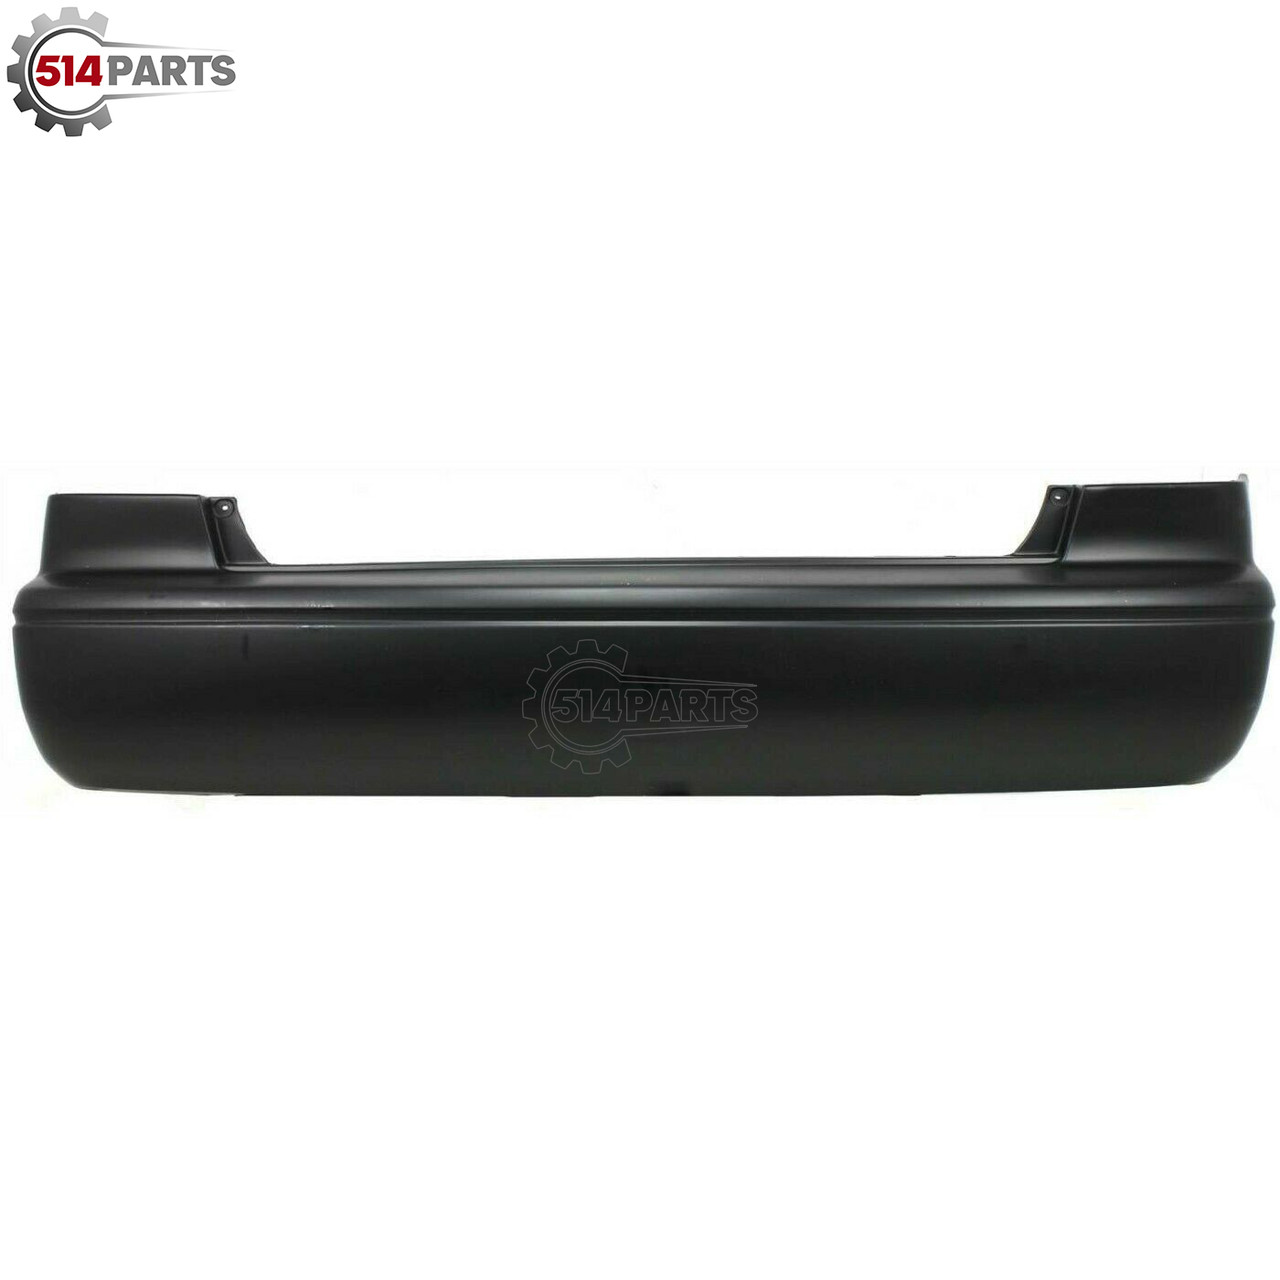 2000 - 2001 TOYOTA CAMRY PRIMED REAR BUMPER COVER - PARE-CHOCS ARRIERE PRIME